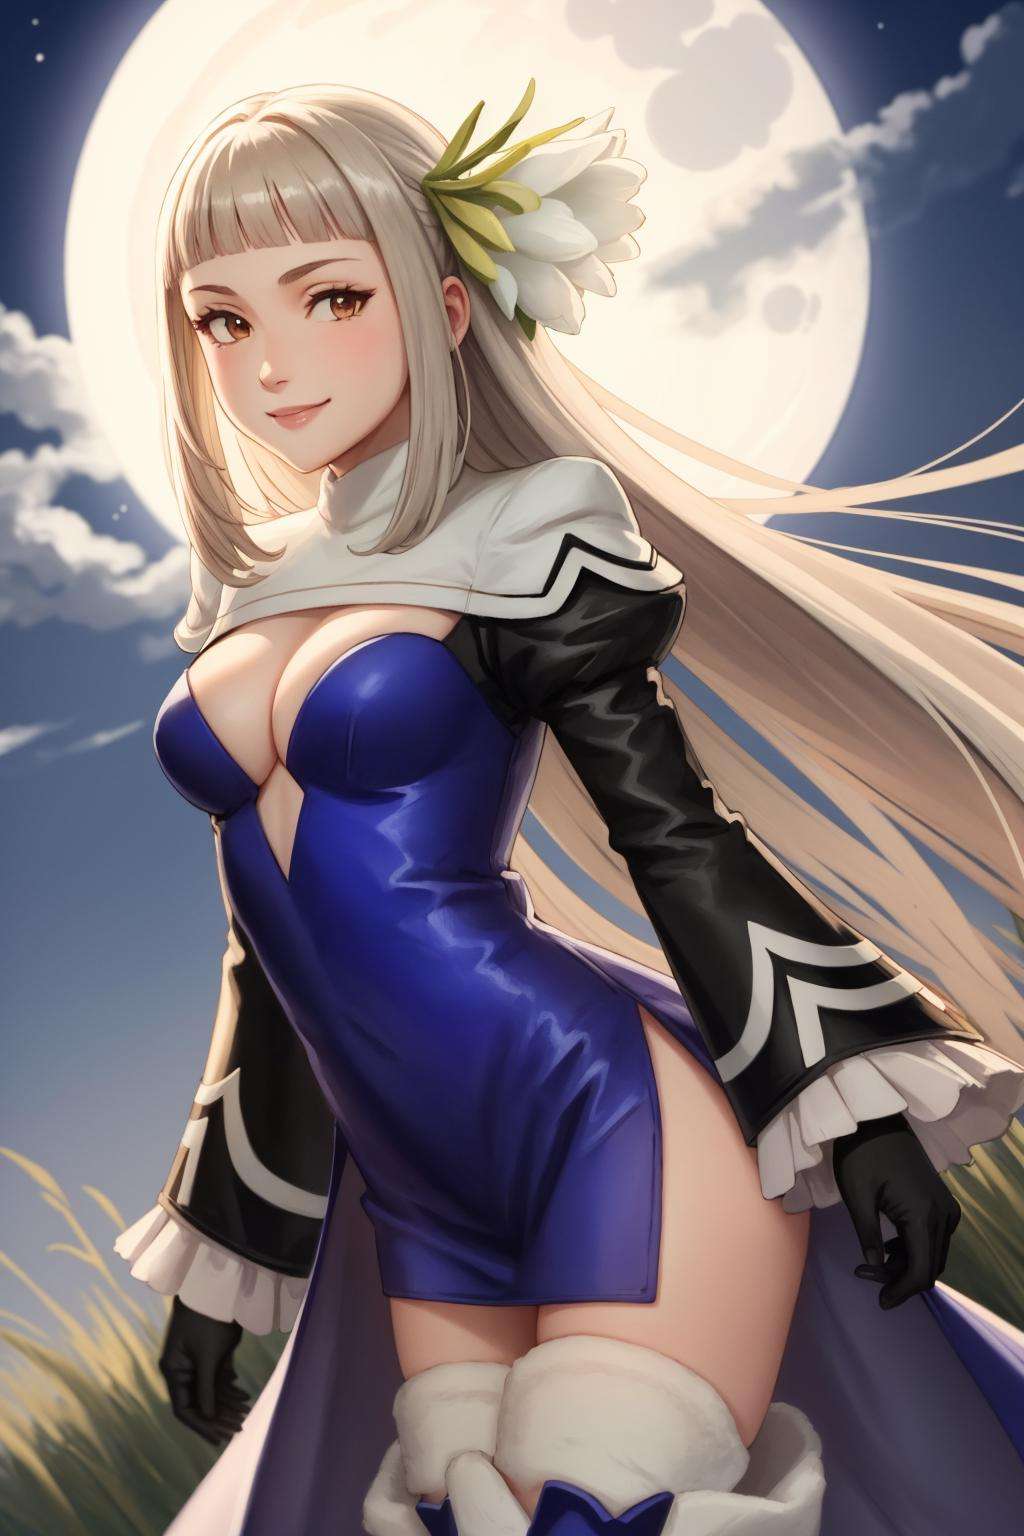 bravely second magnolia arch